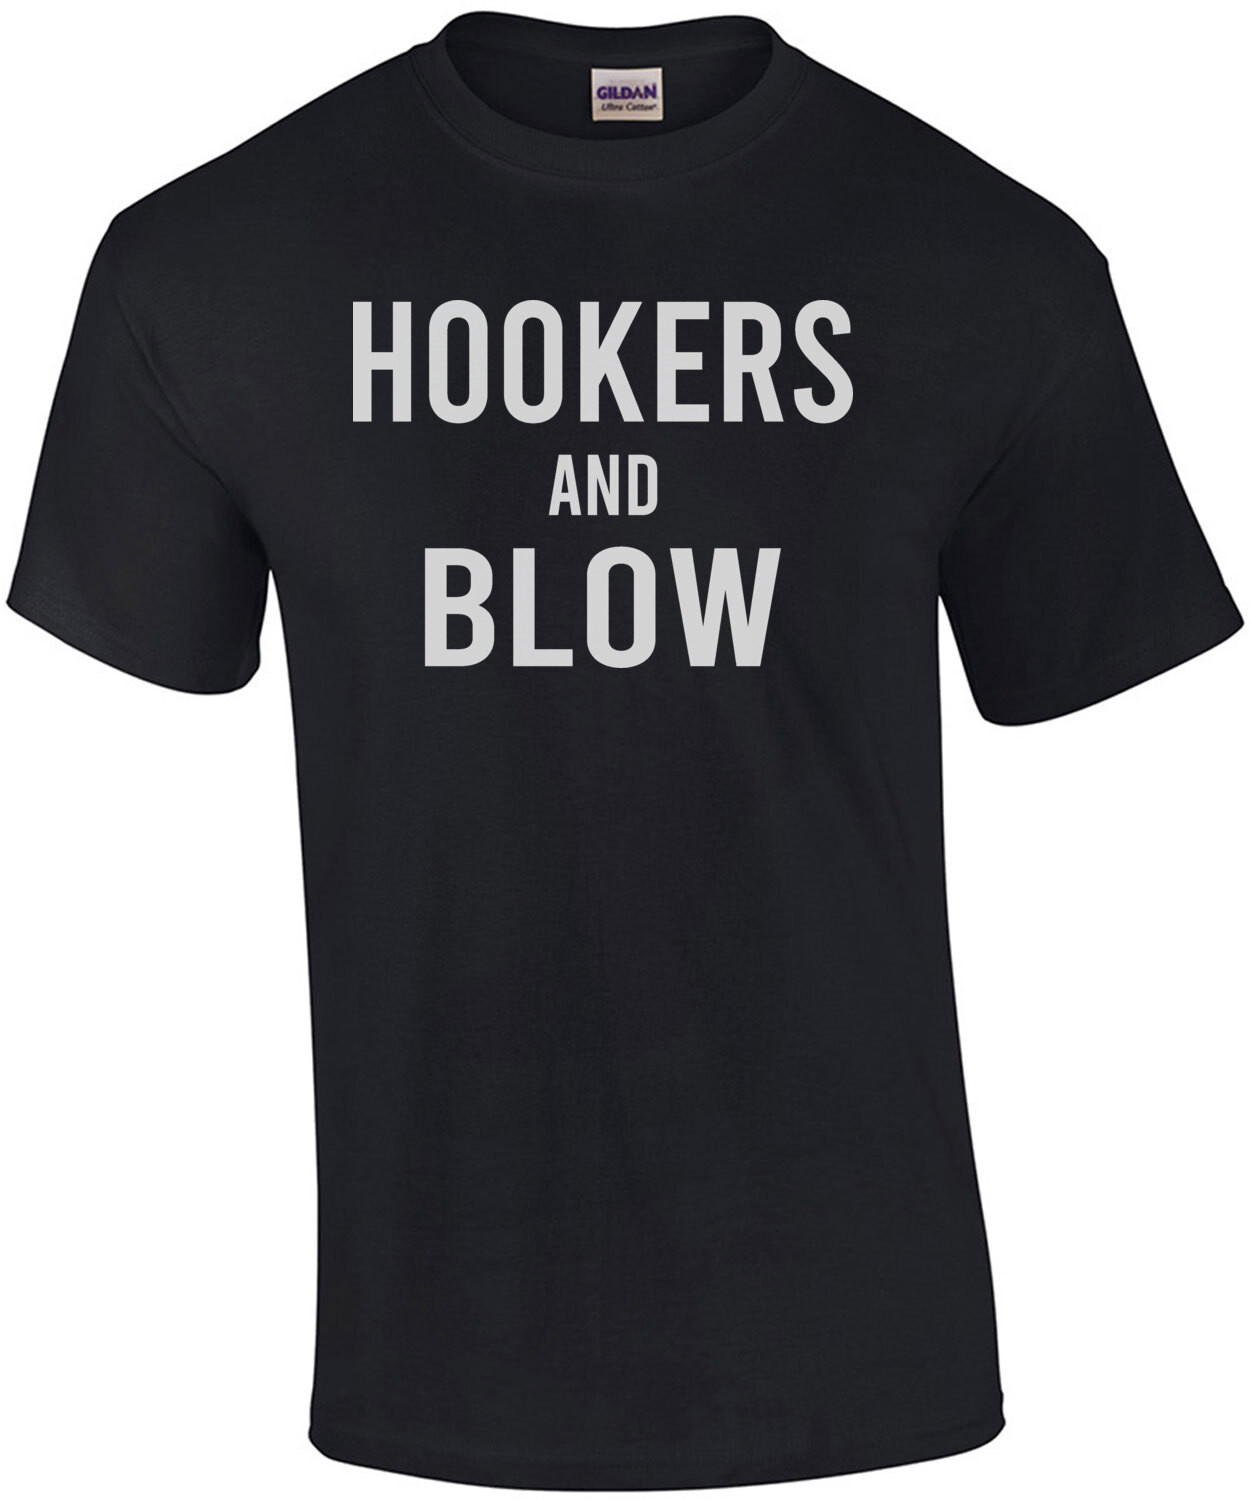 Hookers and Blow - Funny T-Shirt